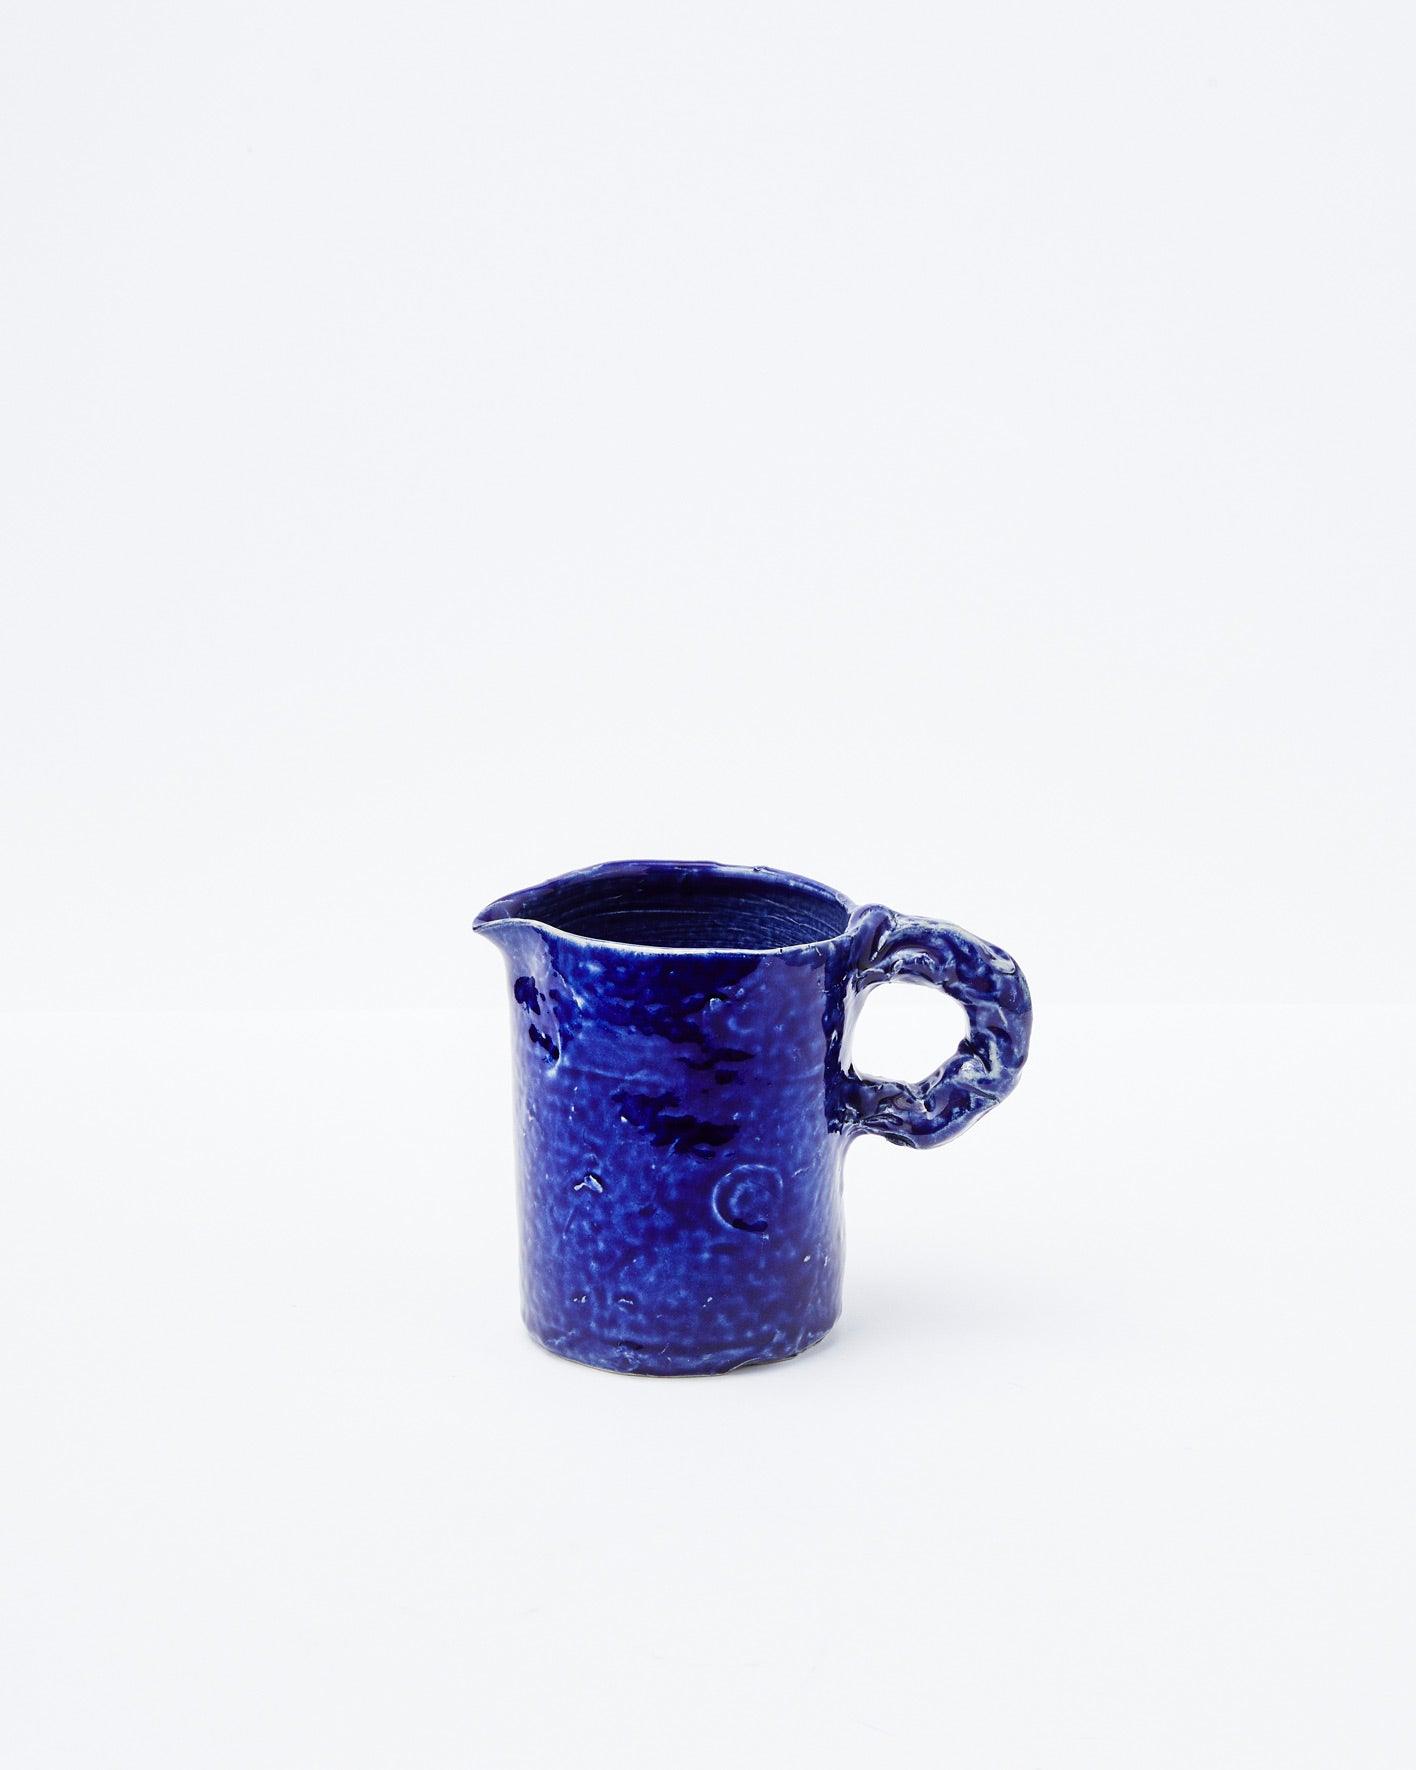 Dark blue modern ceramic pitcher with left-handed handle on a white background